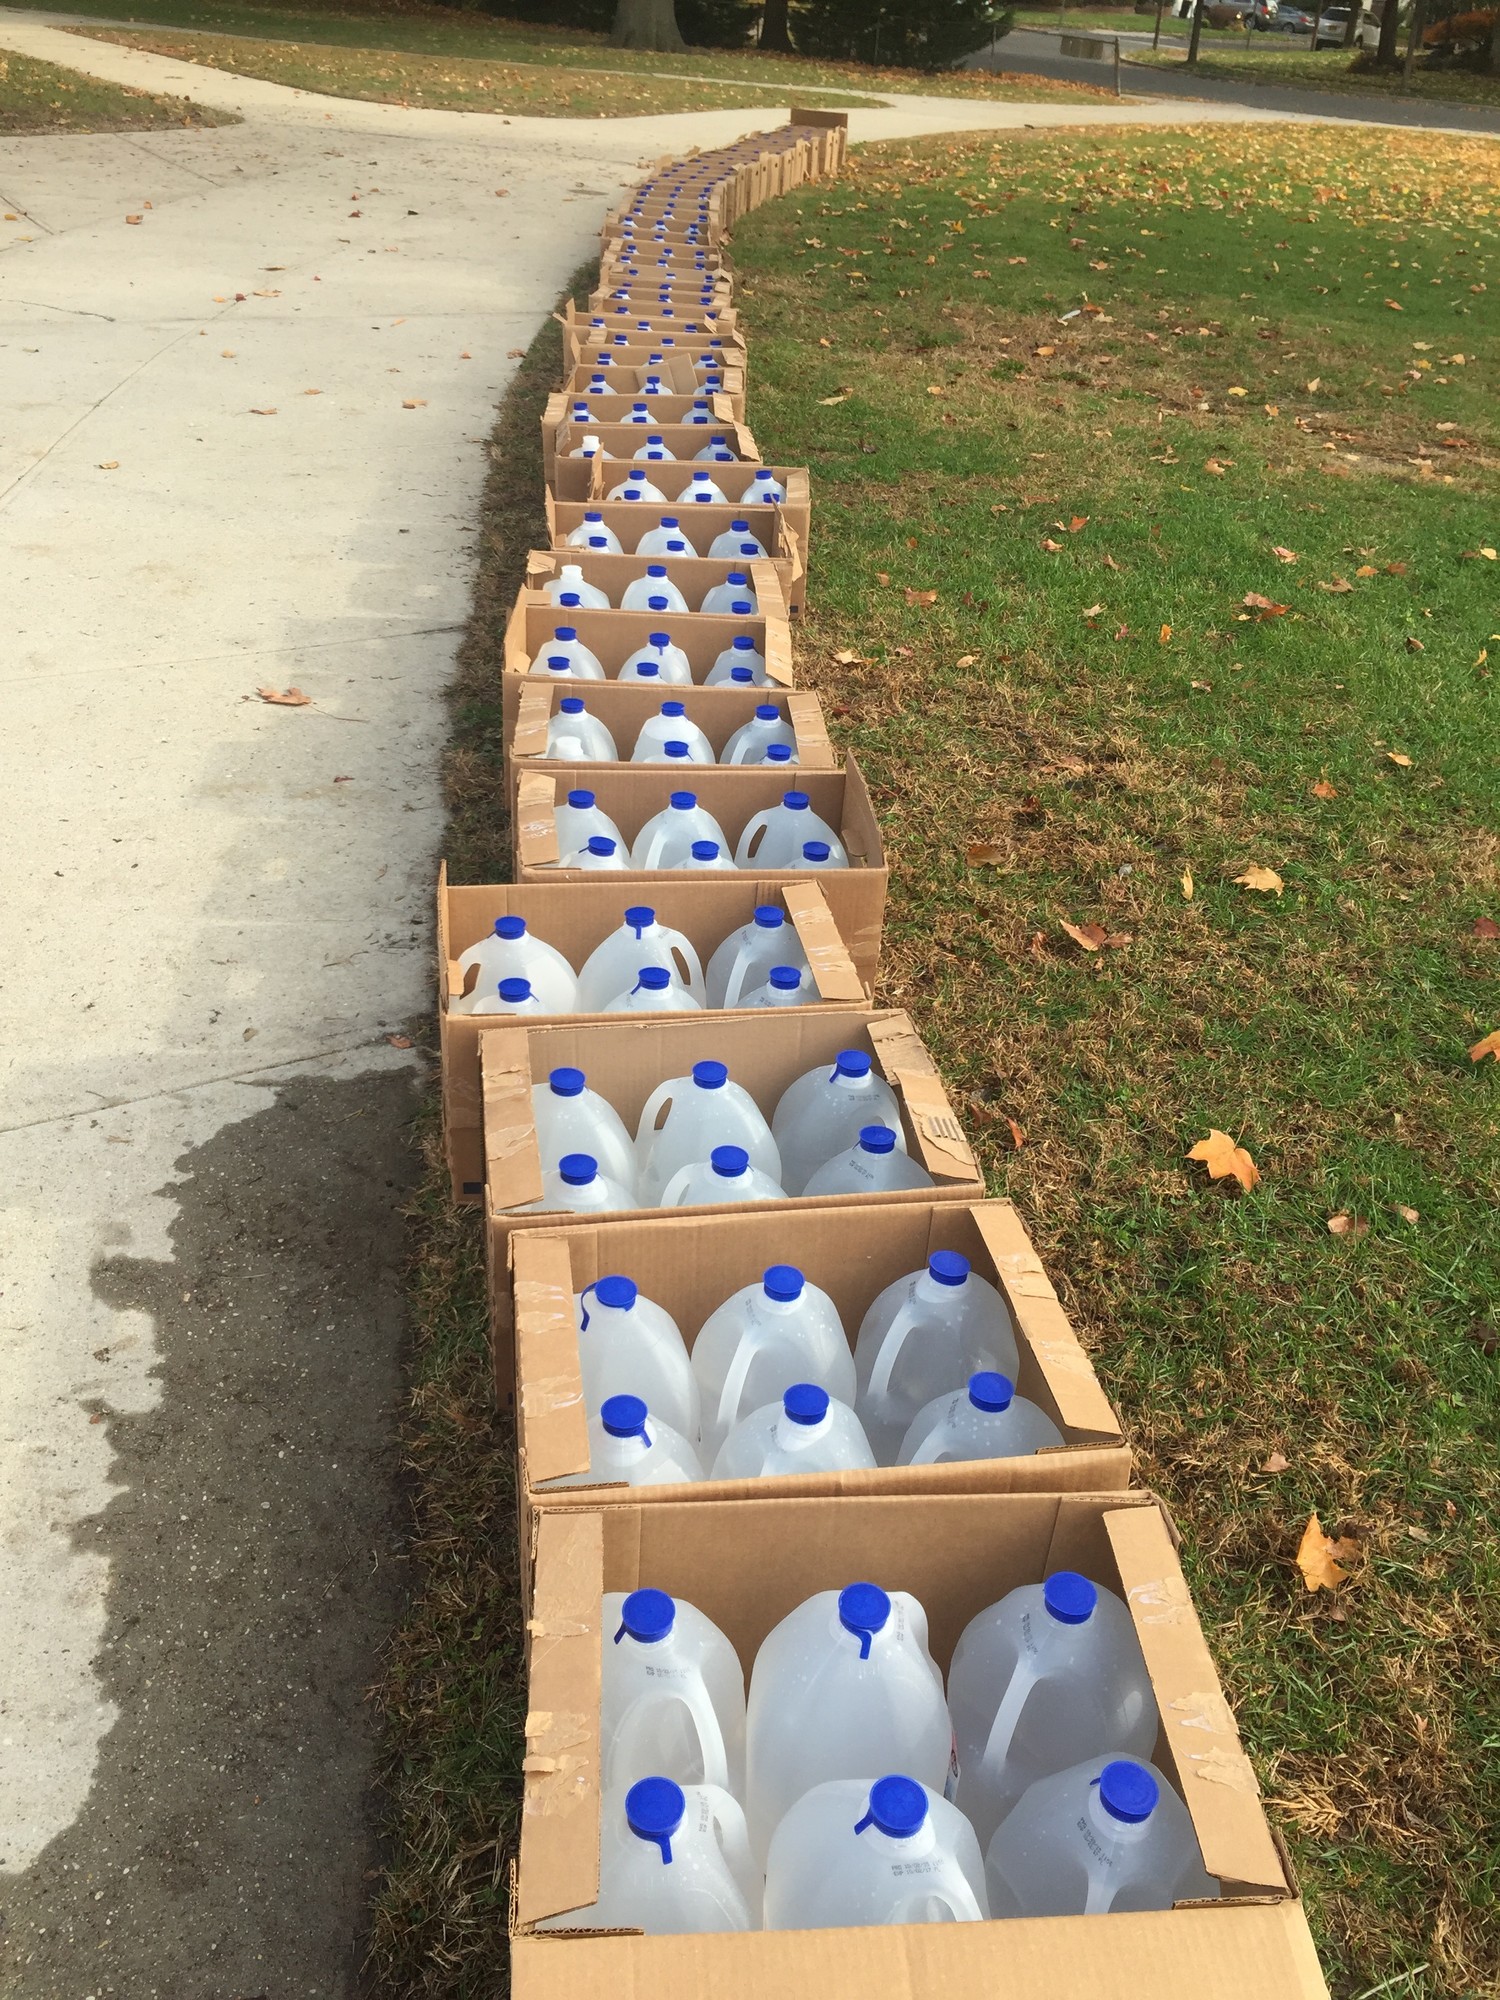 Woodland’s sixth- and seventh-grade classes donated 3,658 pounds of foodstuffs to Island Harvest this fall, including more than 350 jugs of water.